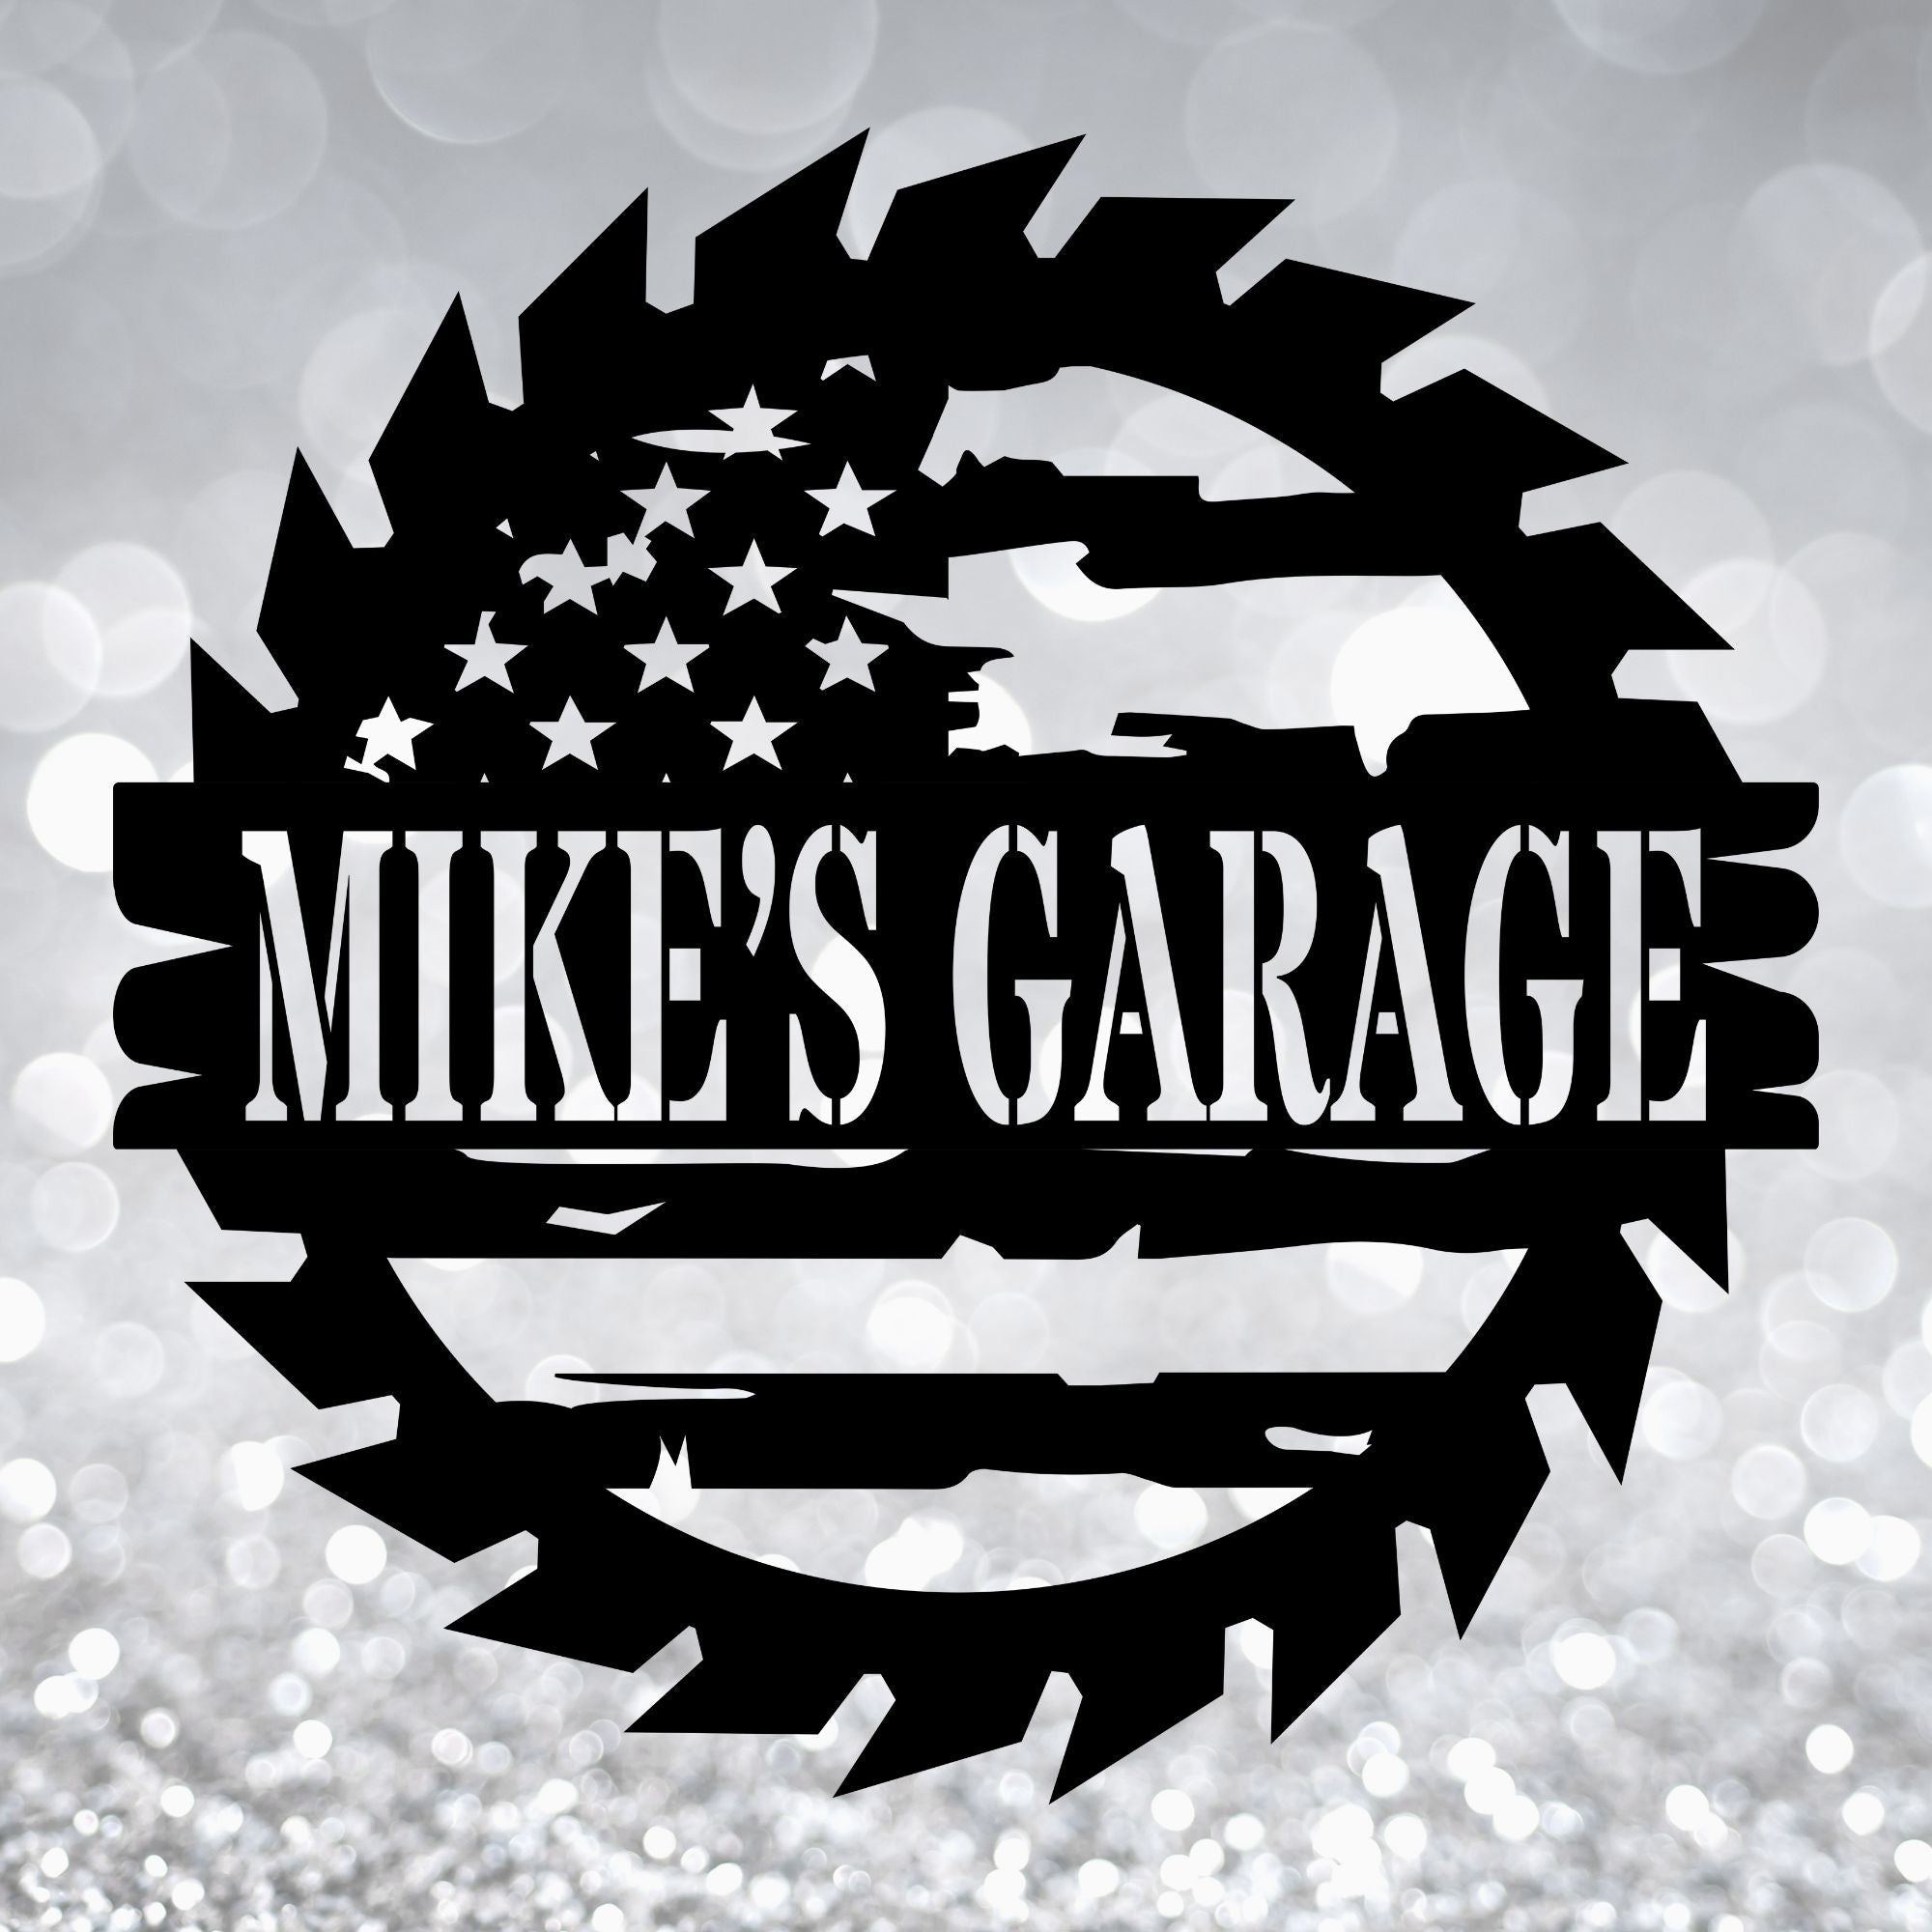 Personalized Garage Saw Sign with American Flag - Cool Metal Signs